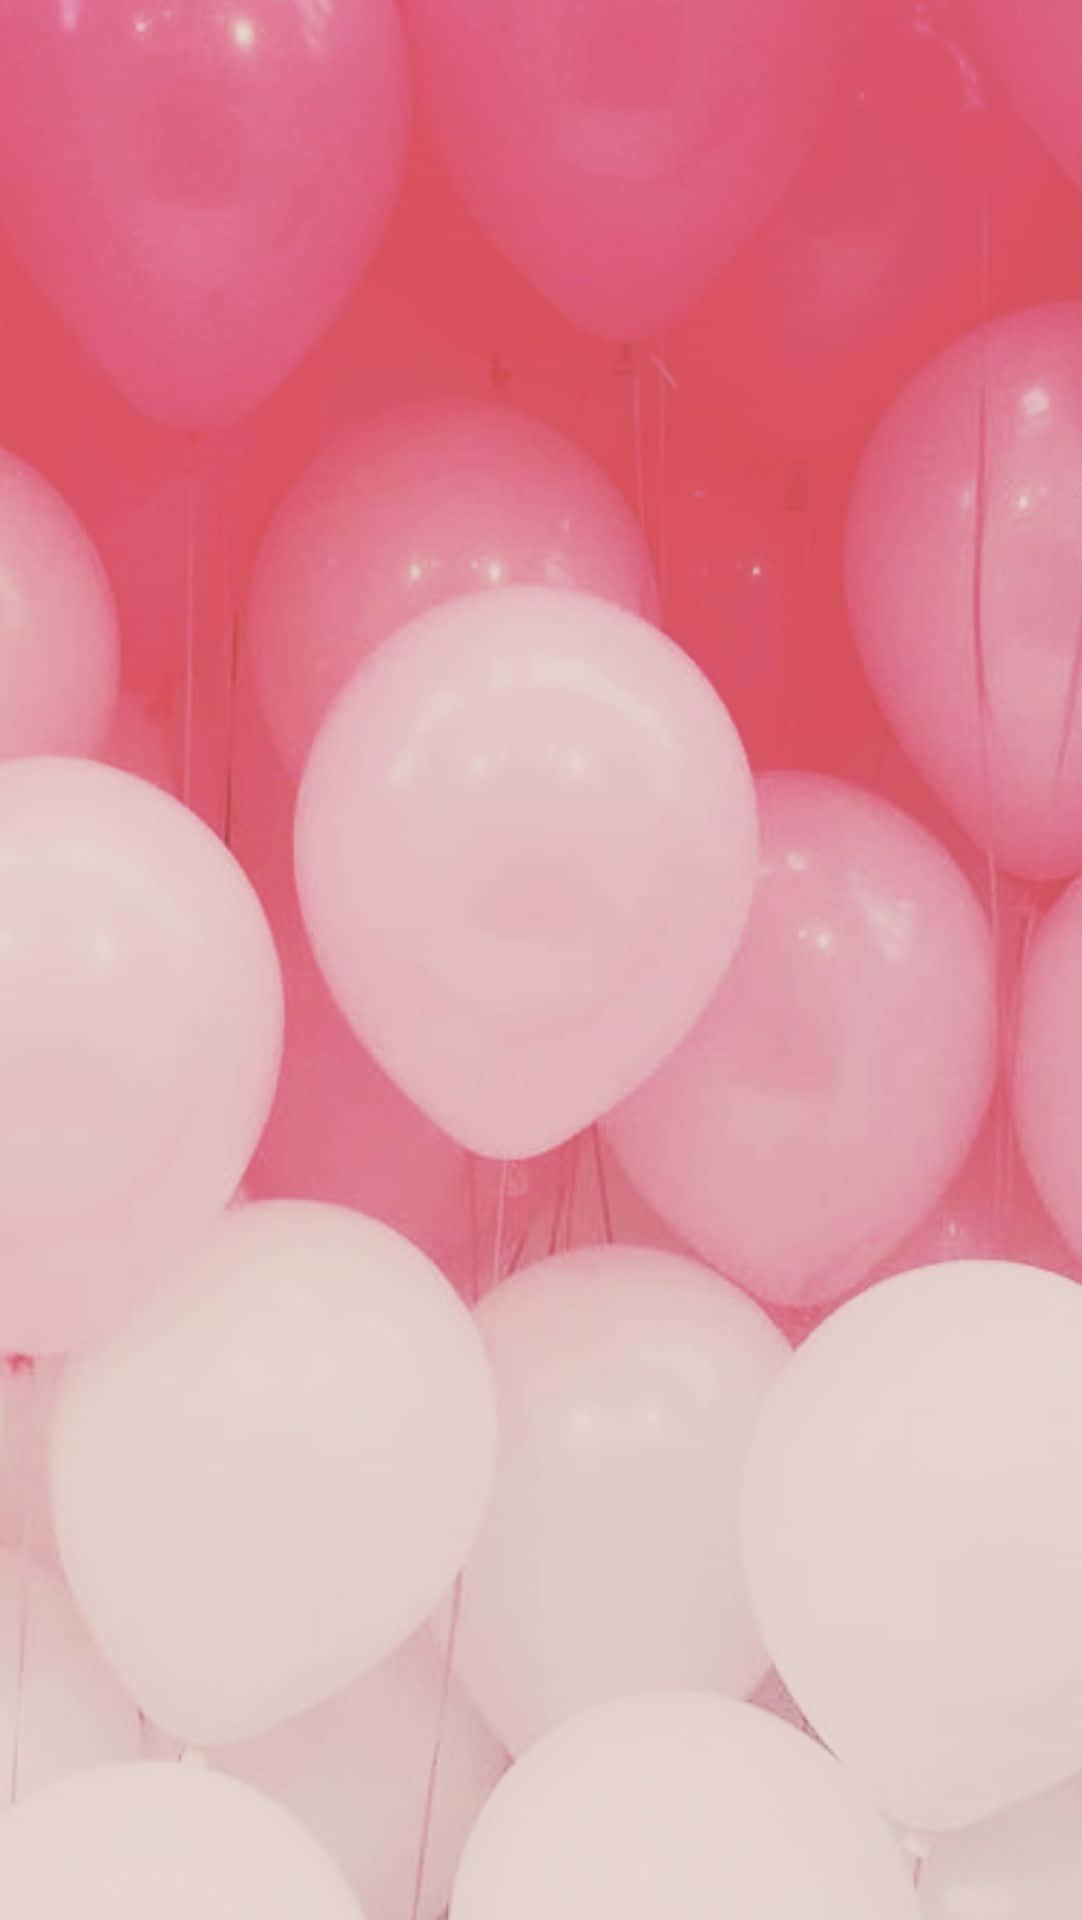 Pink And White Balloons In A Pink And White Background